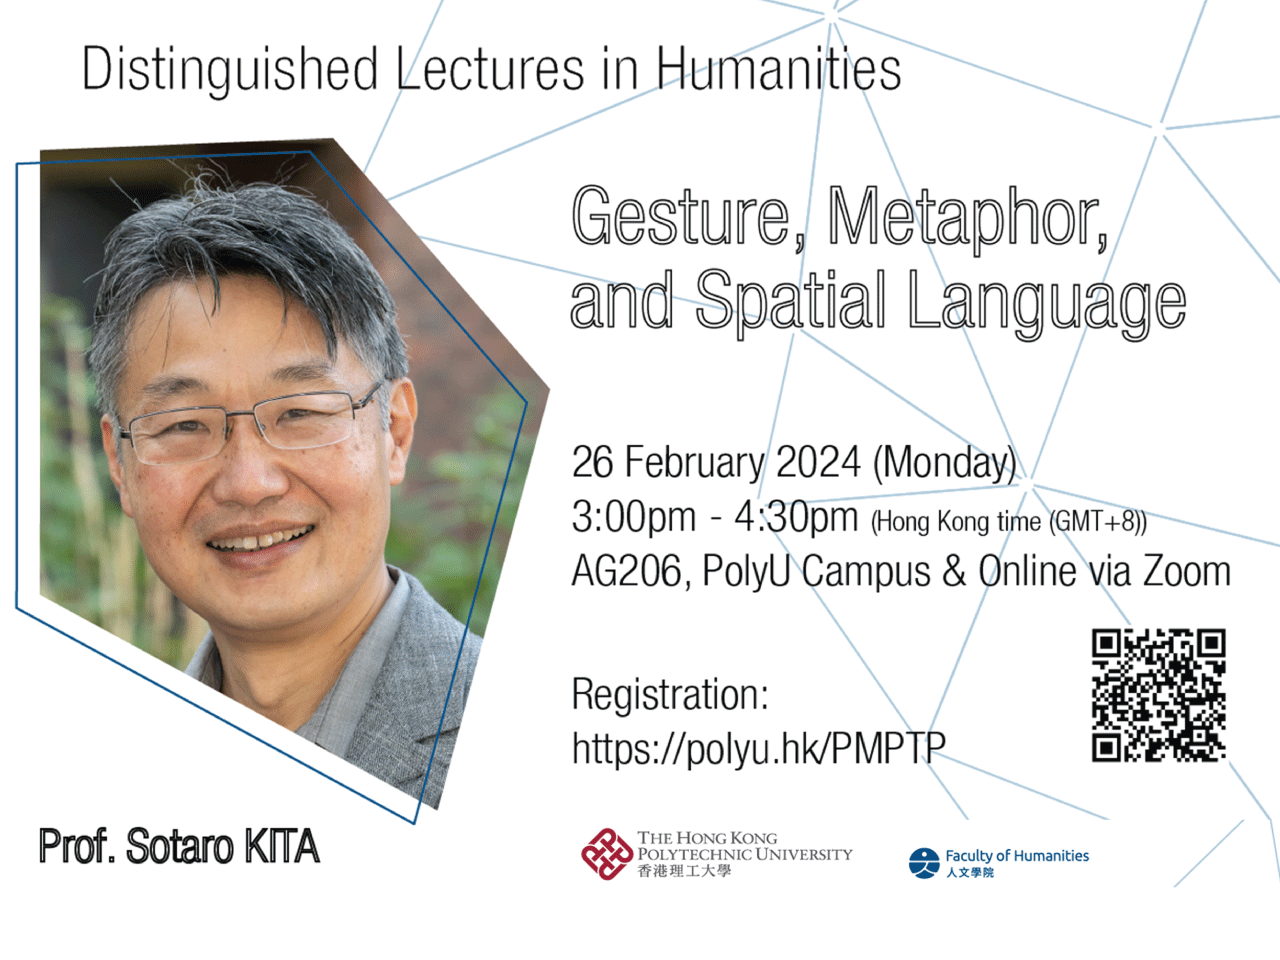 Distinguished lectures in humanities: gesture, metaphor, and spatial language